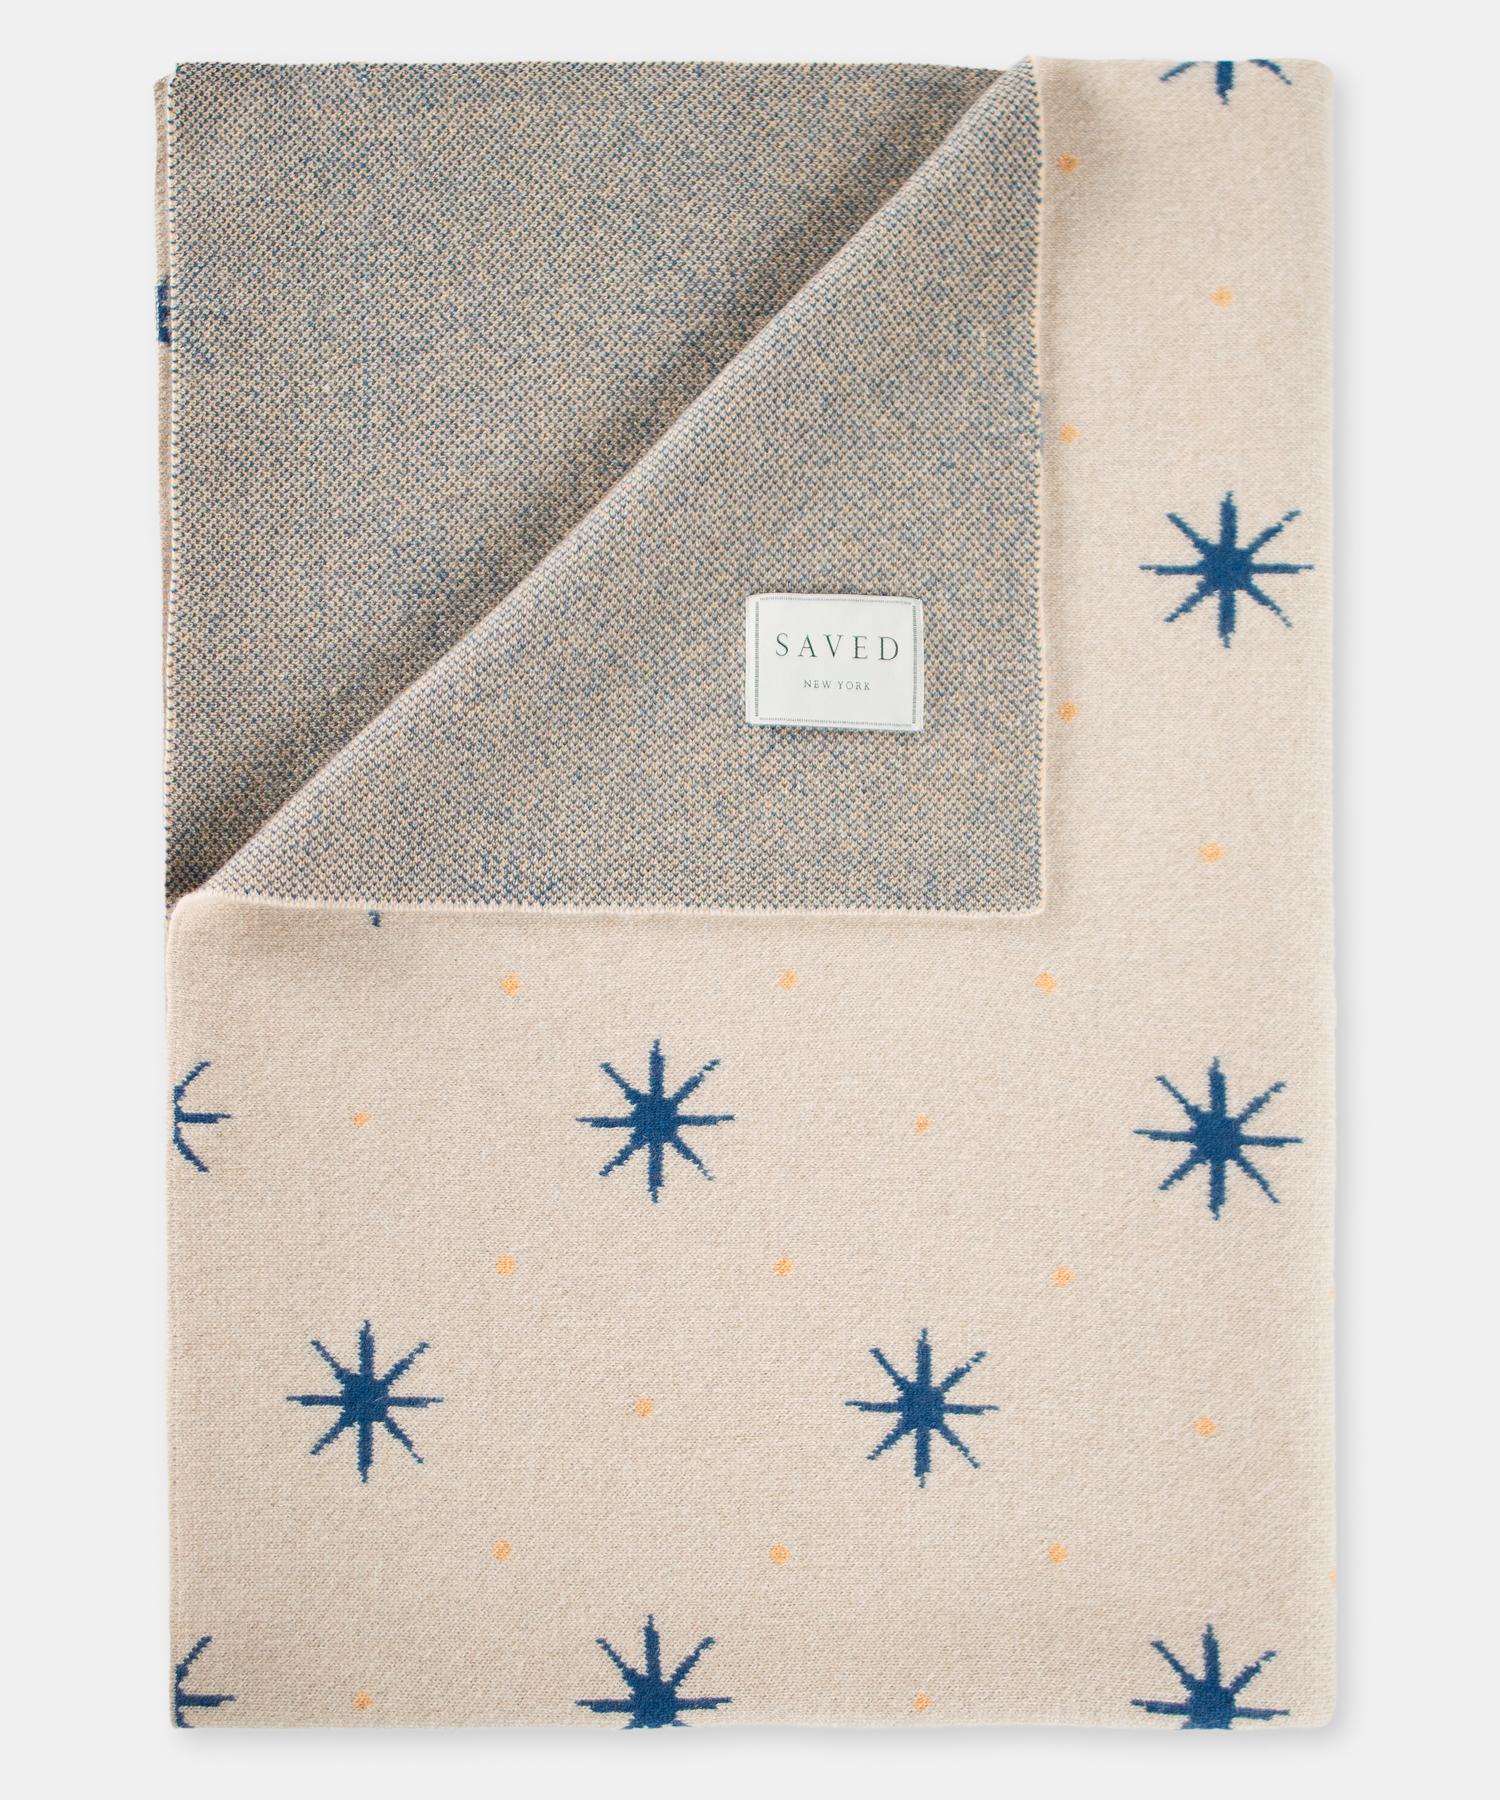 Mongolian Blue Stars Cashmere Throw by Saved, New York